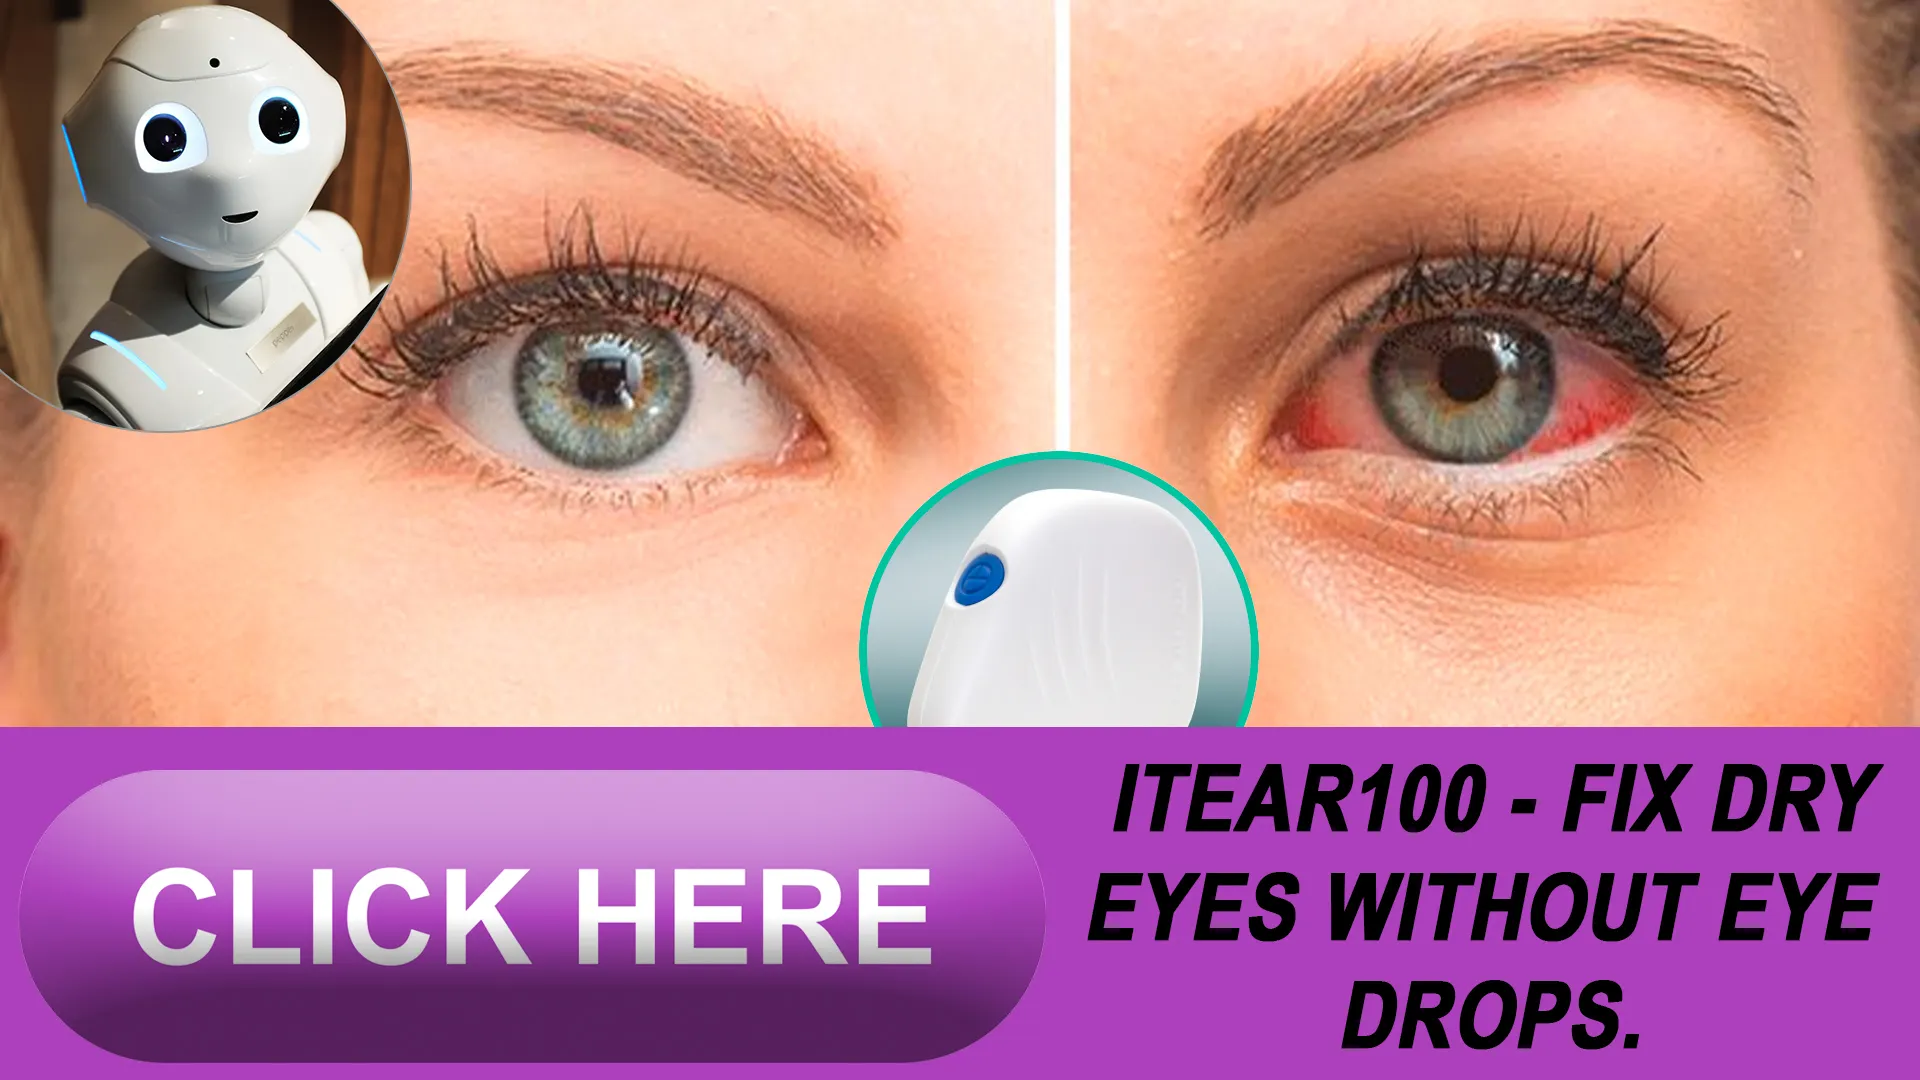 Addressing the Root Causes of Dry Eye